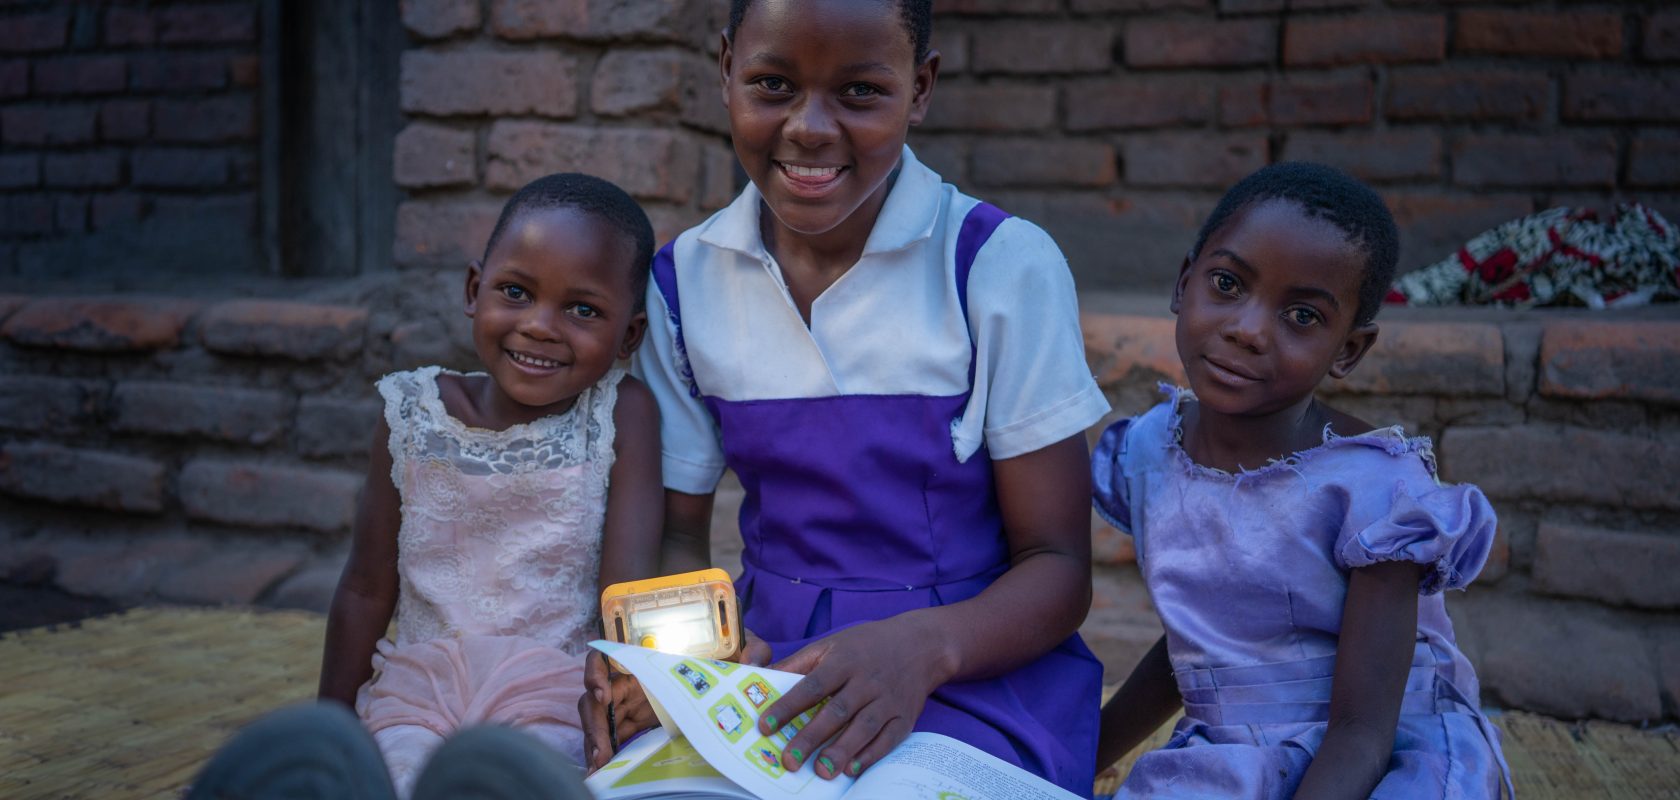 Fabiola, reads to her younger sisters using a solar light